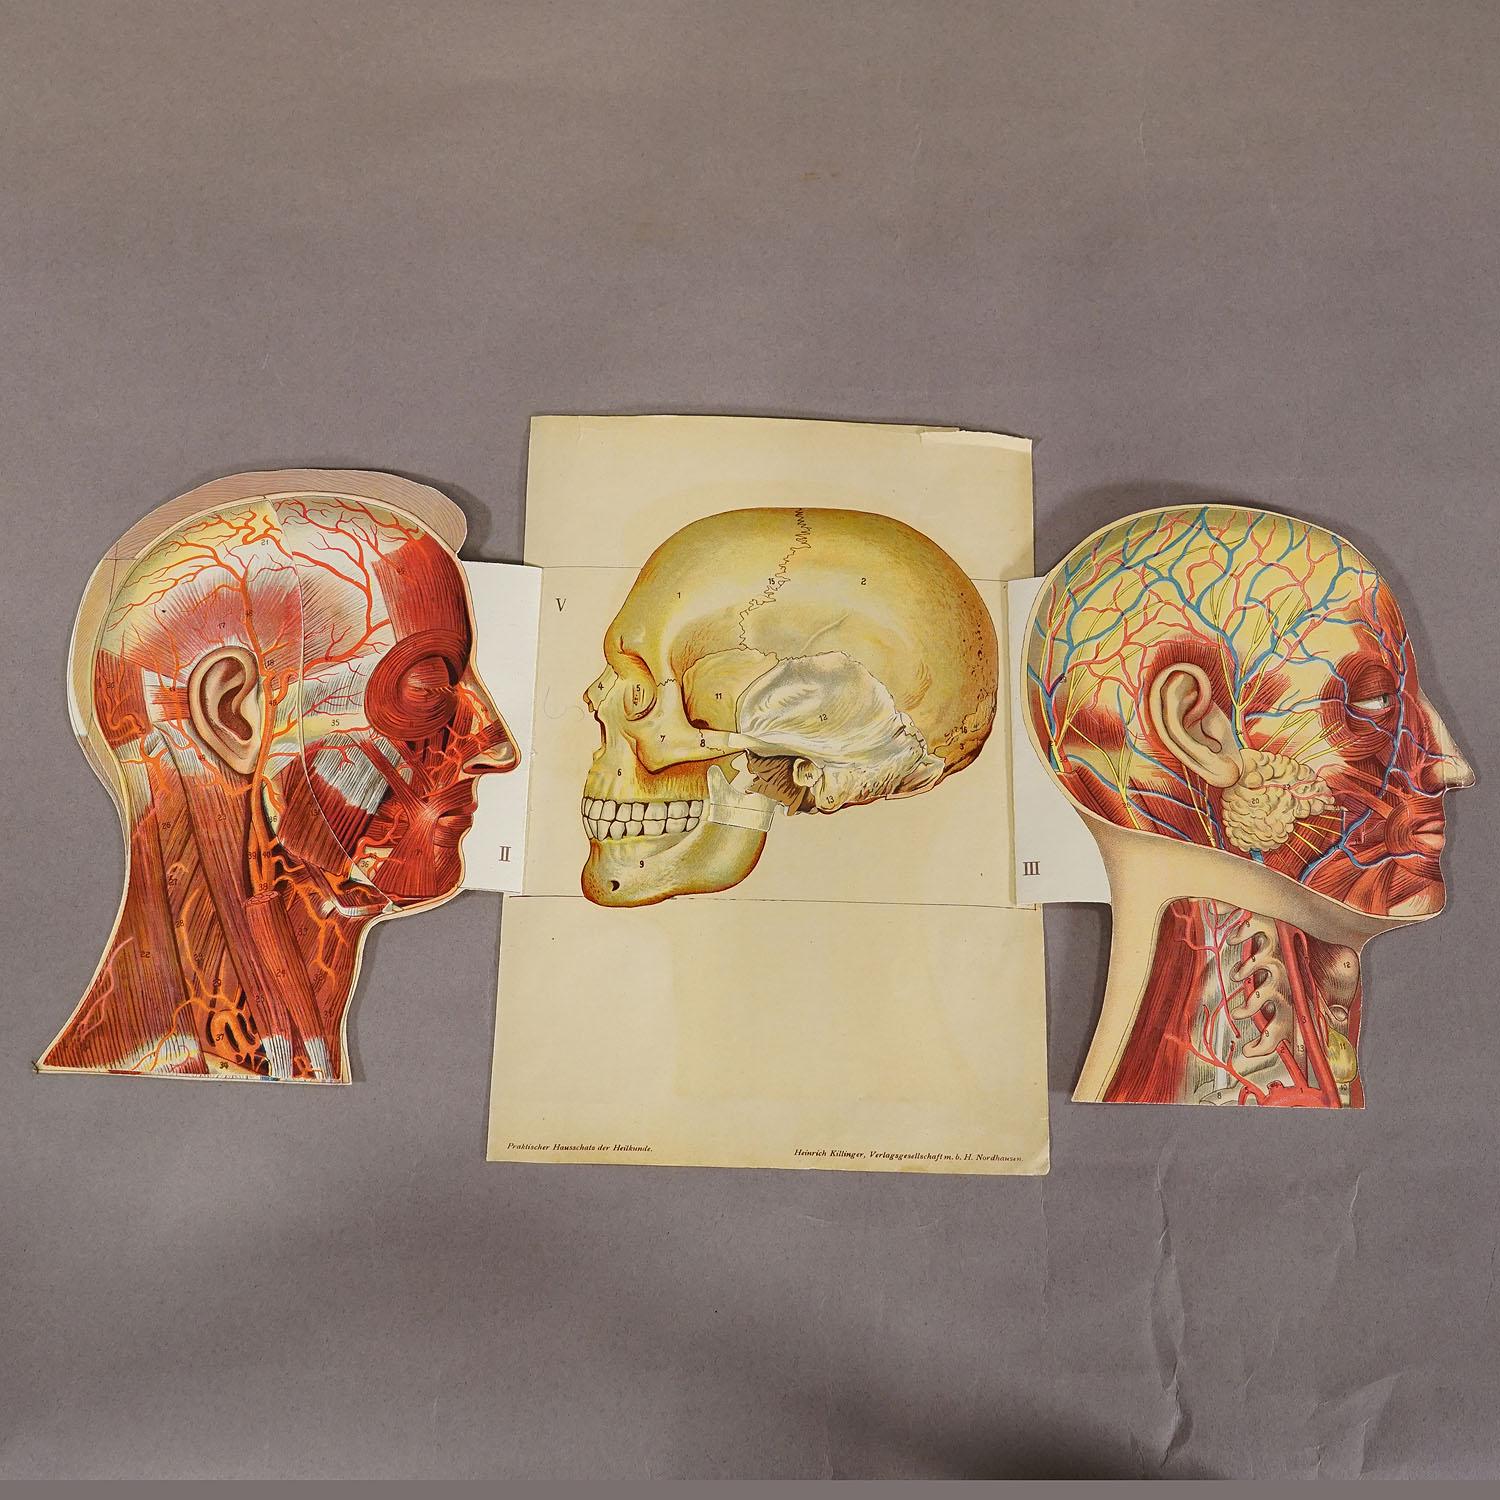 1900s Foldable Anatomical Brochure Depicting the Human Head In Good Condition For Sale In Berghuelen, DE